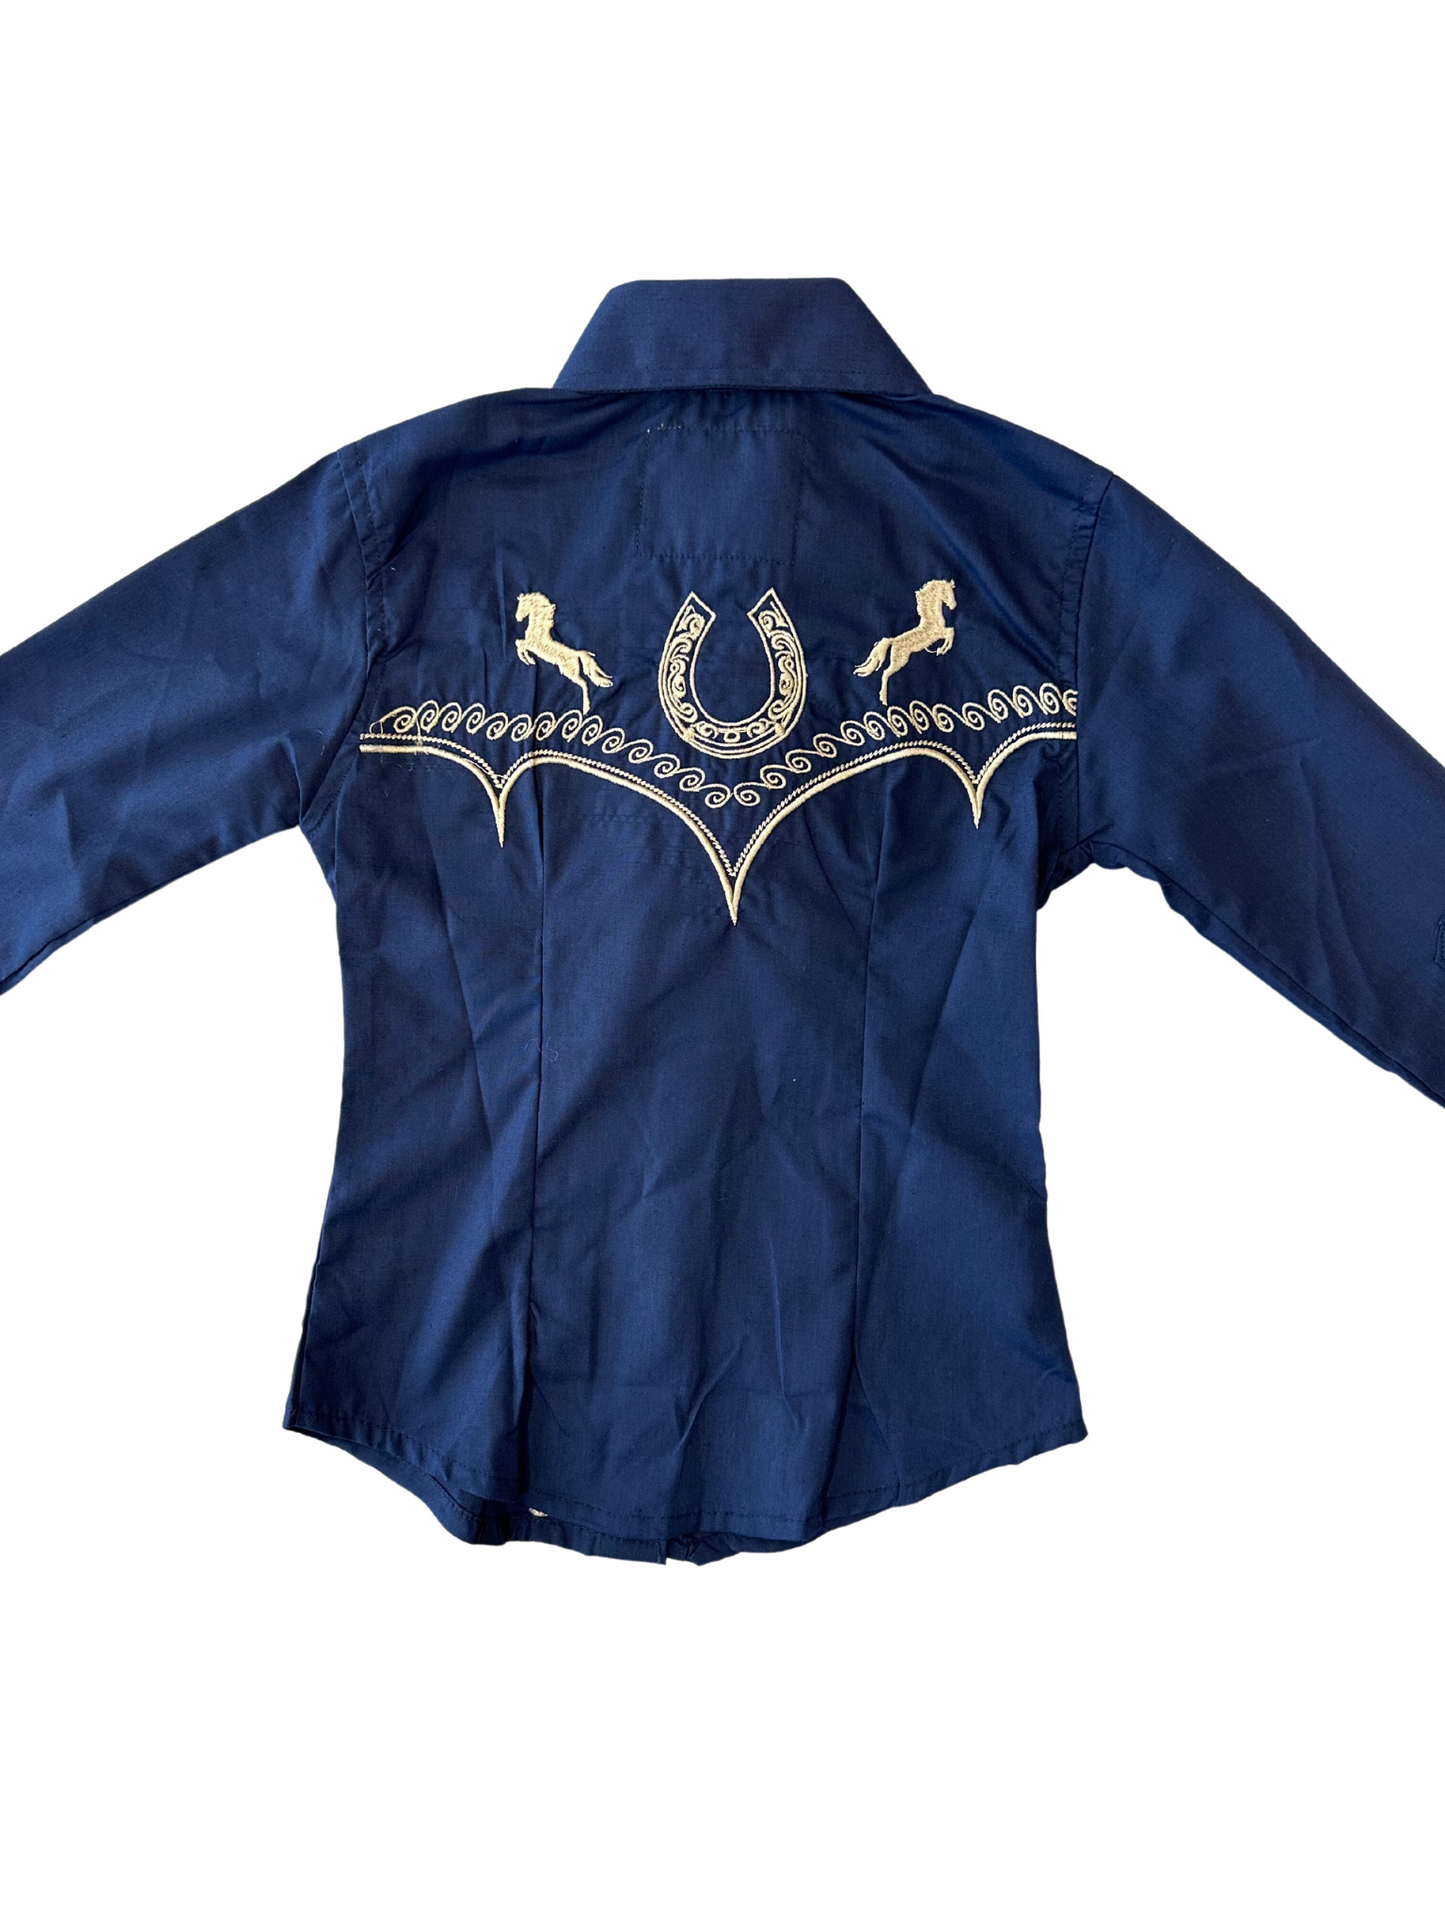 Girl's Horseshoe Embroided Button Down Shirt - Navy